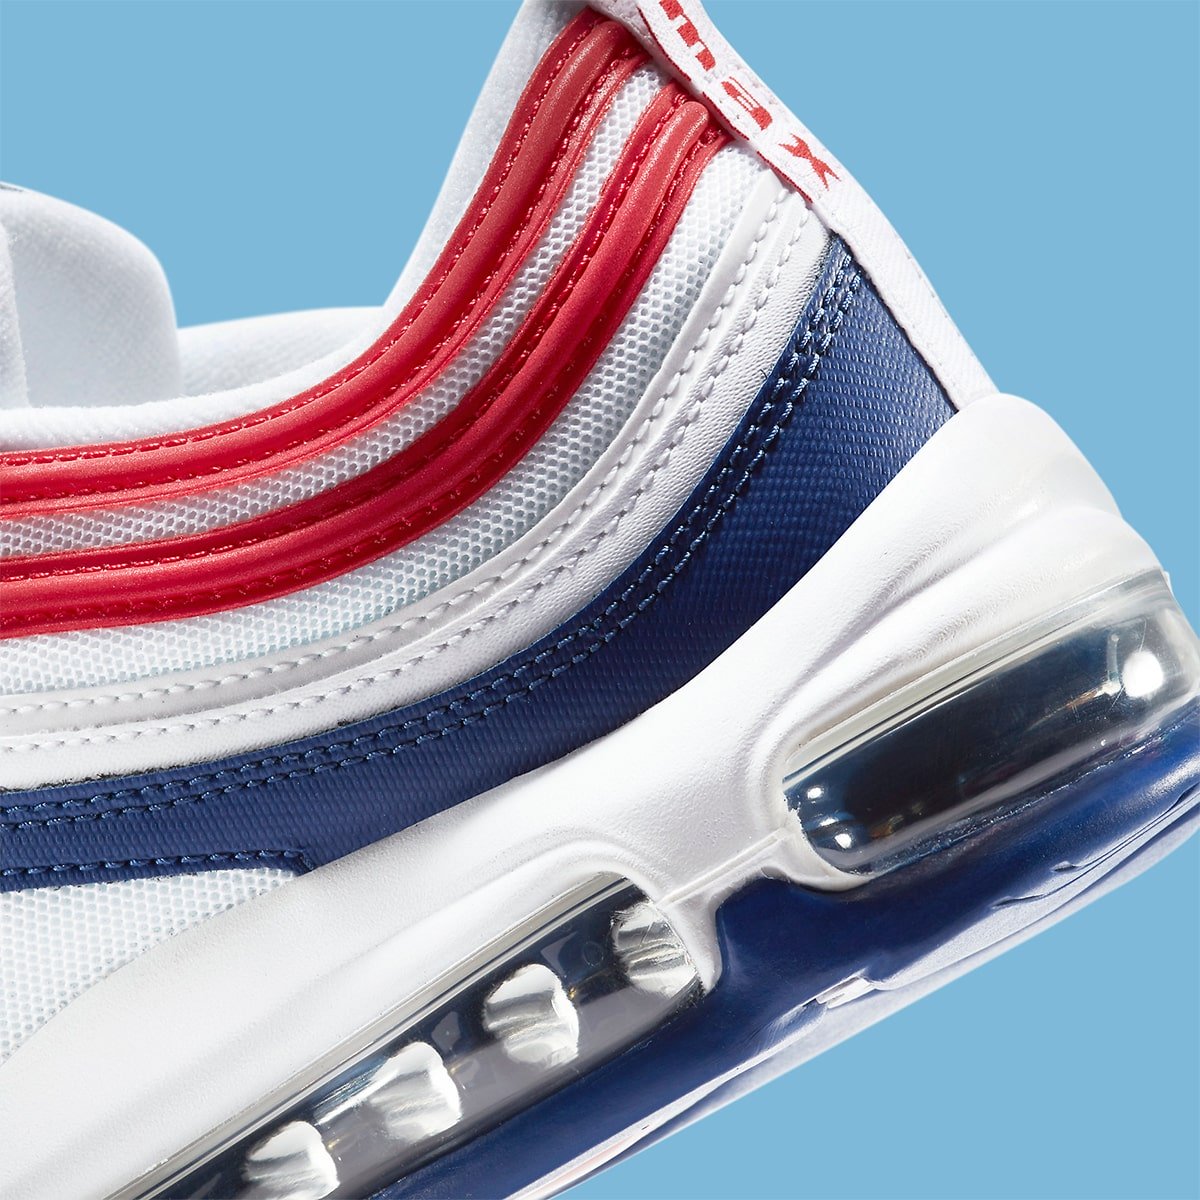 nike-air-max-97-white-navy-red-cw5584-100-release-date-info-8